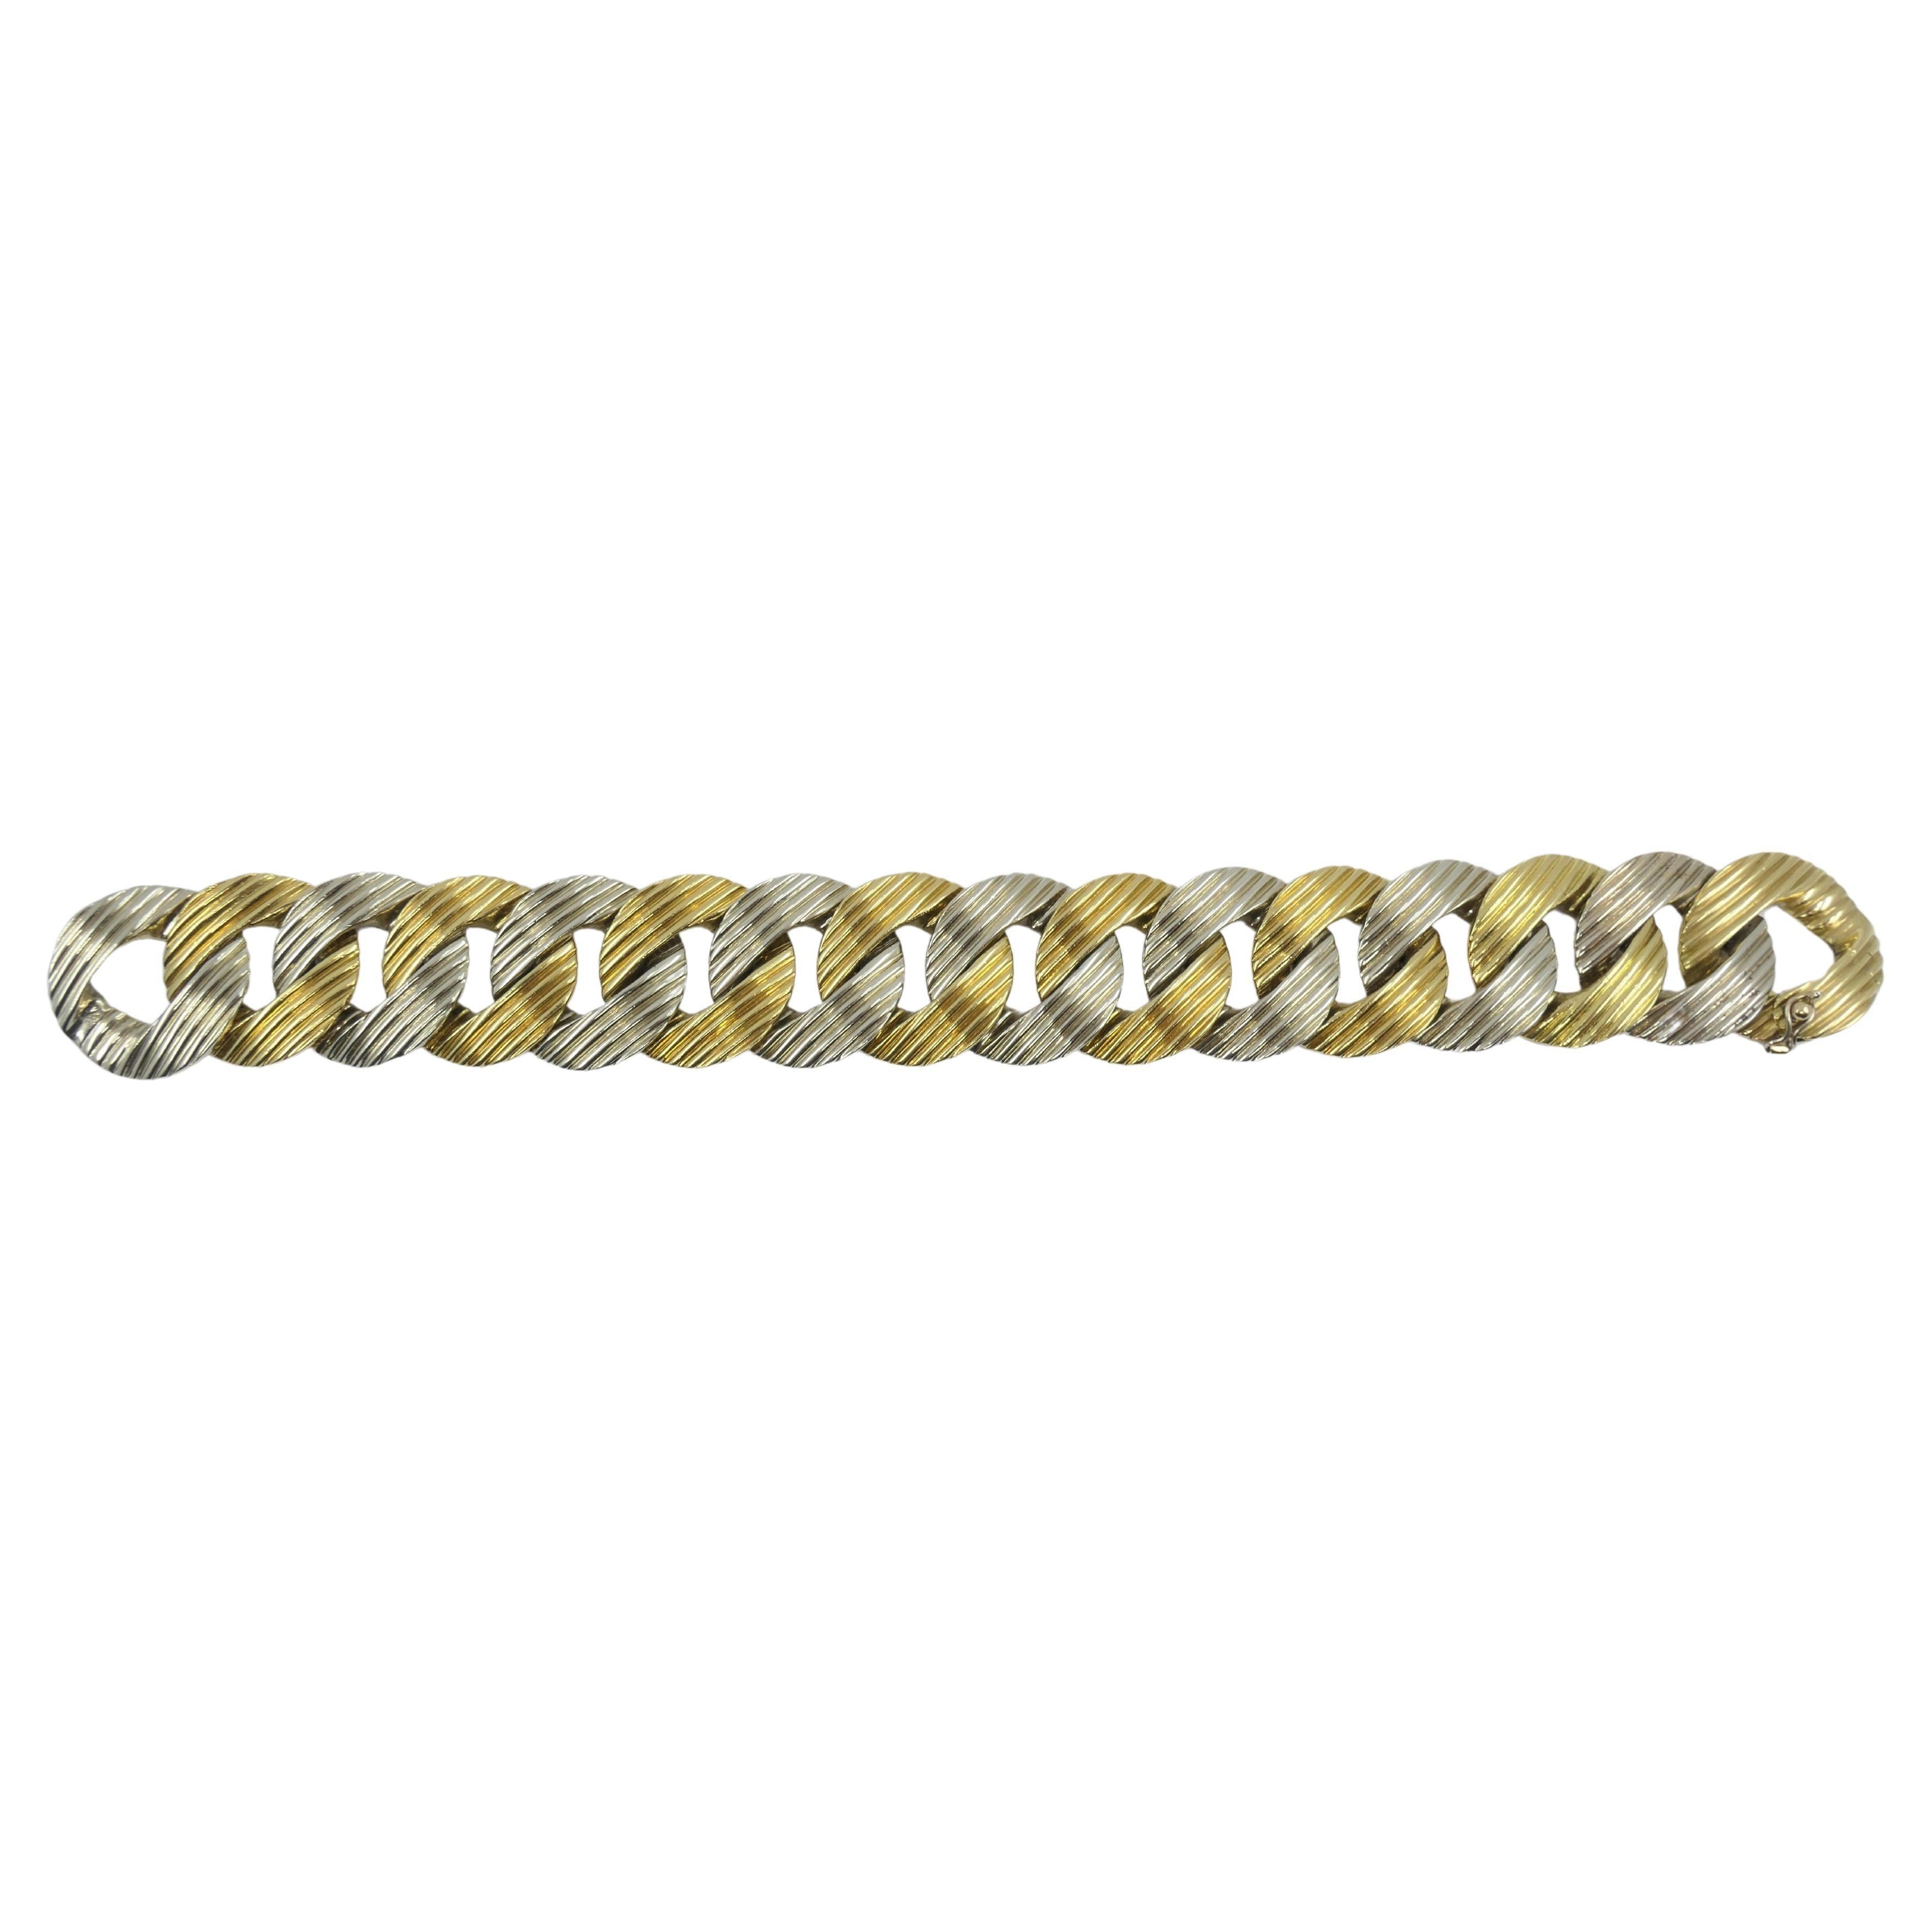 A chunky Pomellato bracelet made of 18k yellow and white gold. The links are greatly textured, which add even more significance to a substantial look. To match the tone of the white gold, the yellow gold hue is subdued and not too bright or yellow.